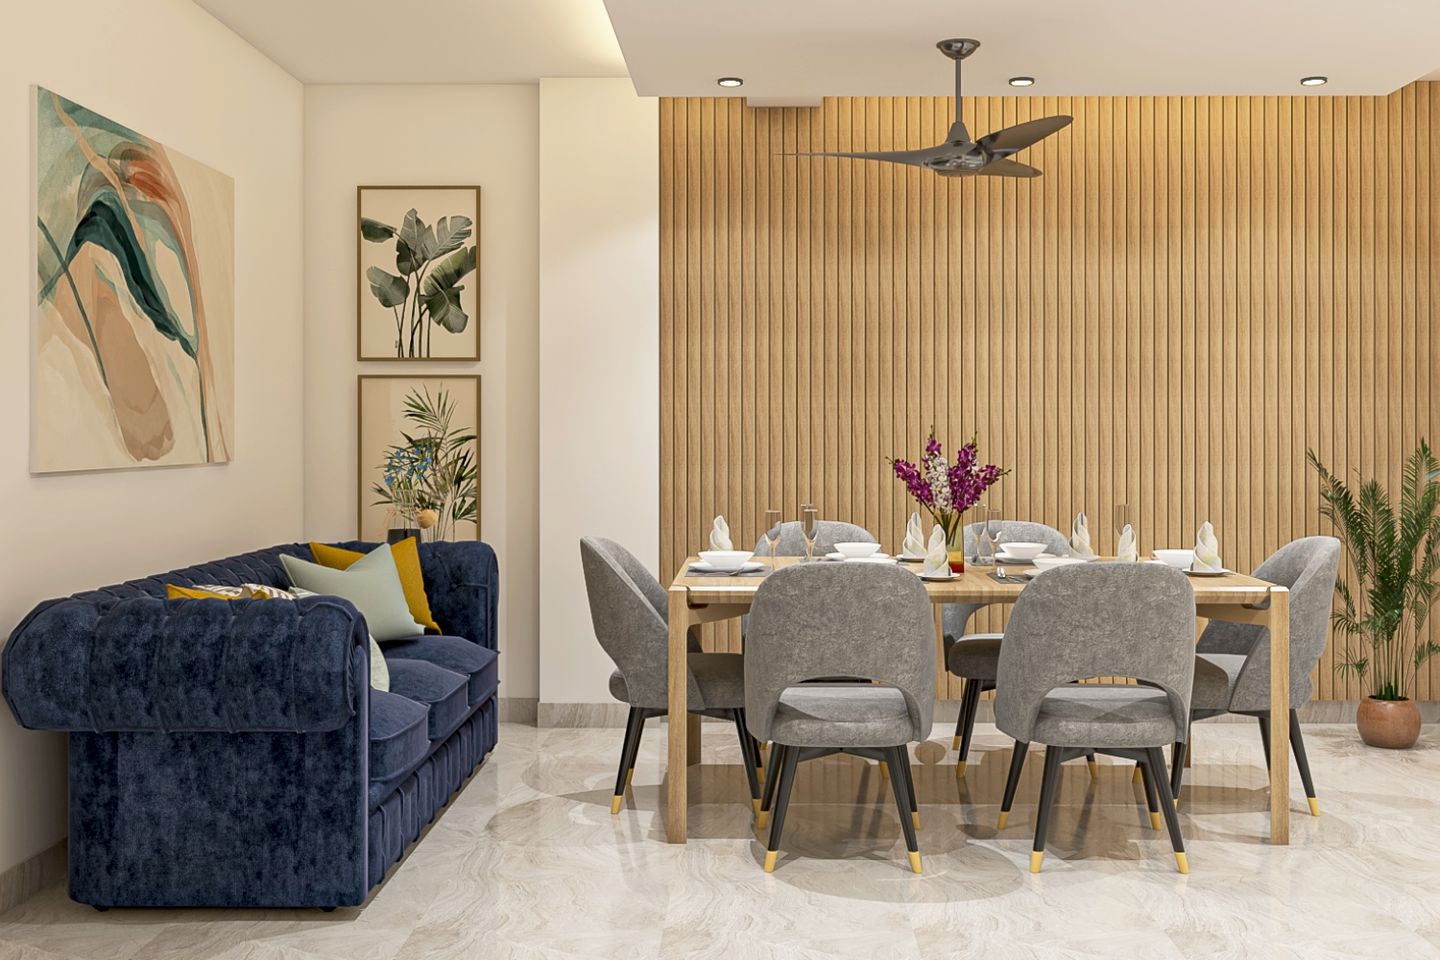 Spacious Dining Room Design With 6-Seater Grey And Wood Dining Table, Blue Velvet Sofa And Wooden Wall Panelling - Livspace